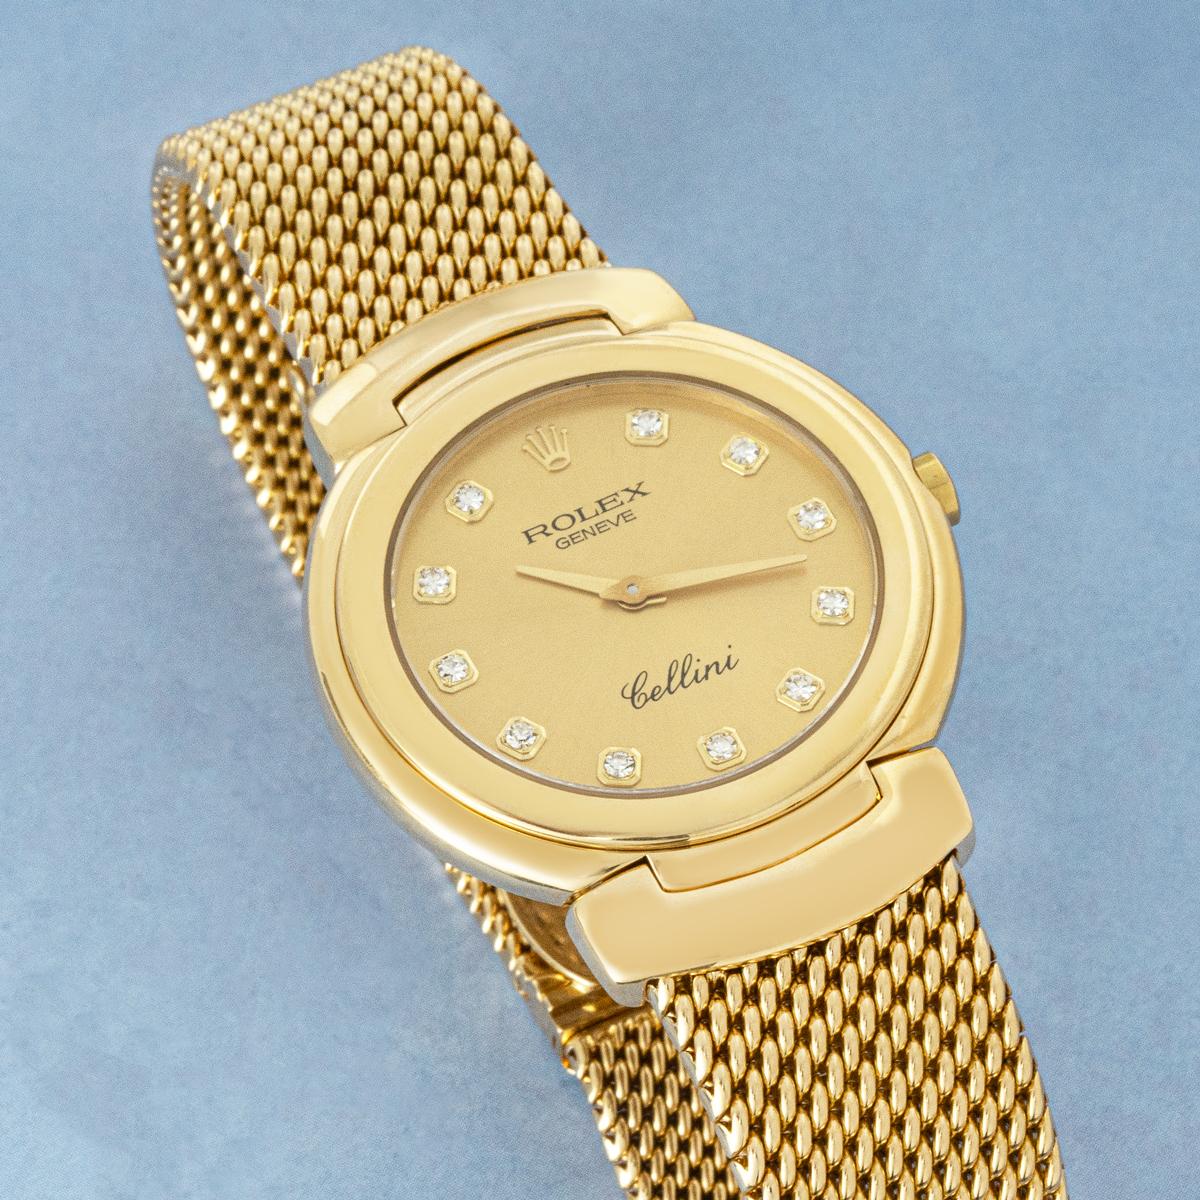 Rolex Cellini Yellow Gold 6622 In Excellent Condition For Sale In London, GB